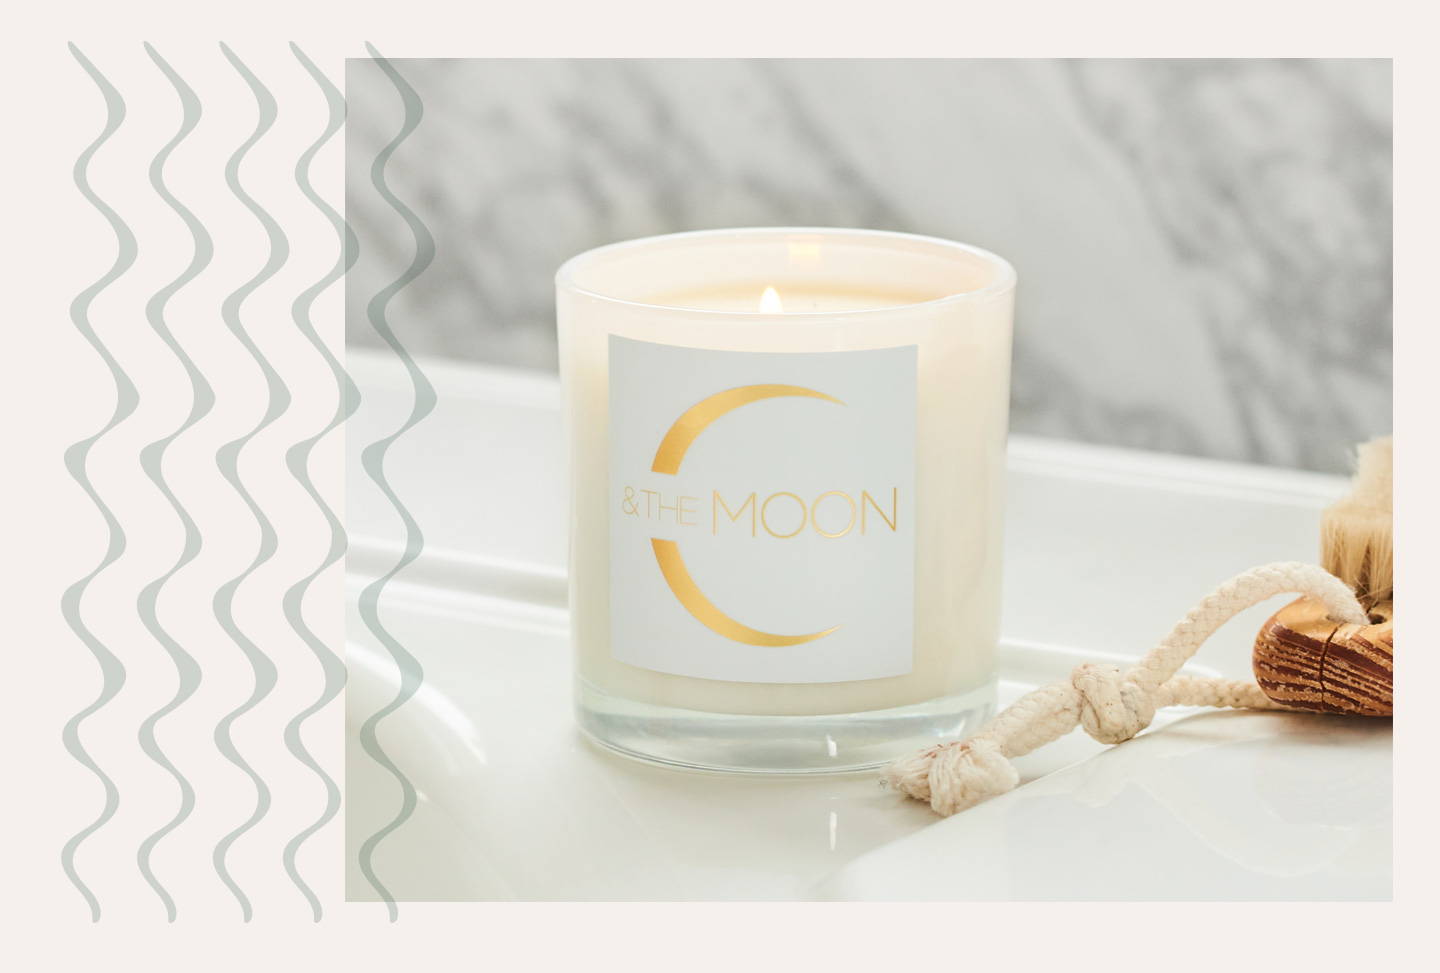 C & the Moon Sugar Cookie Candle